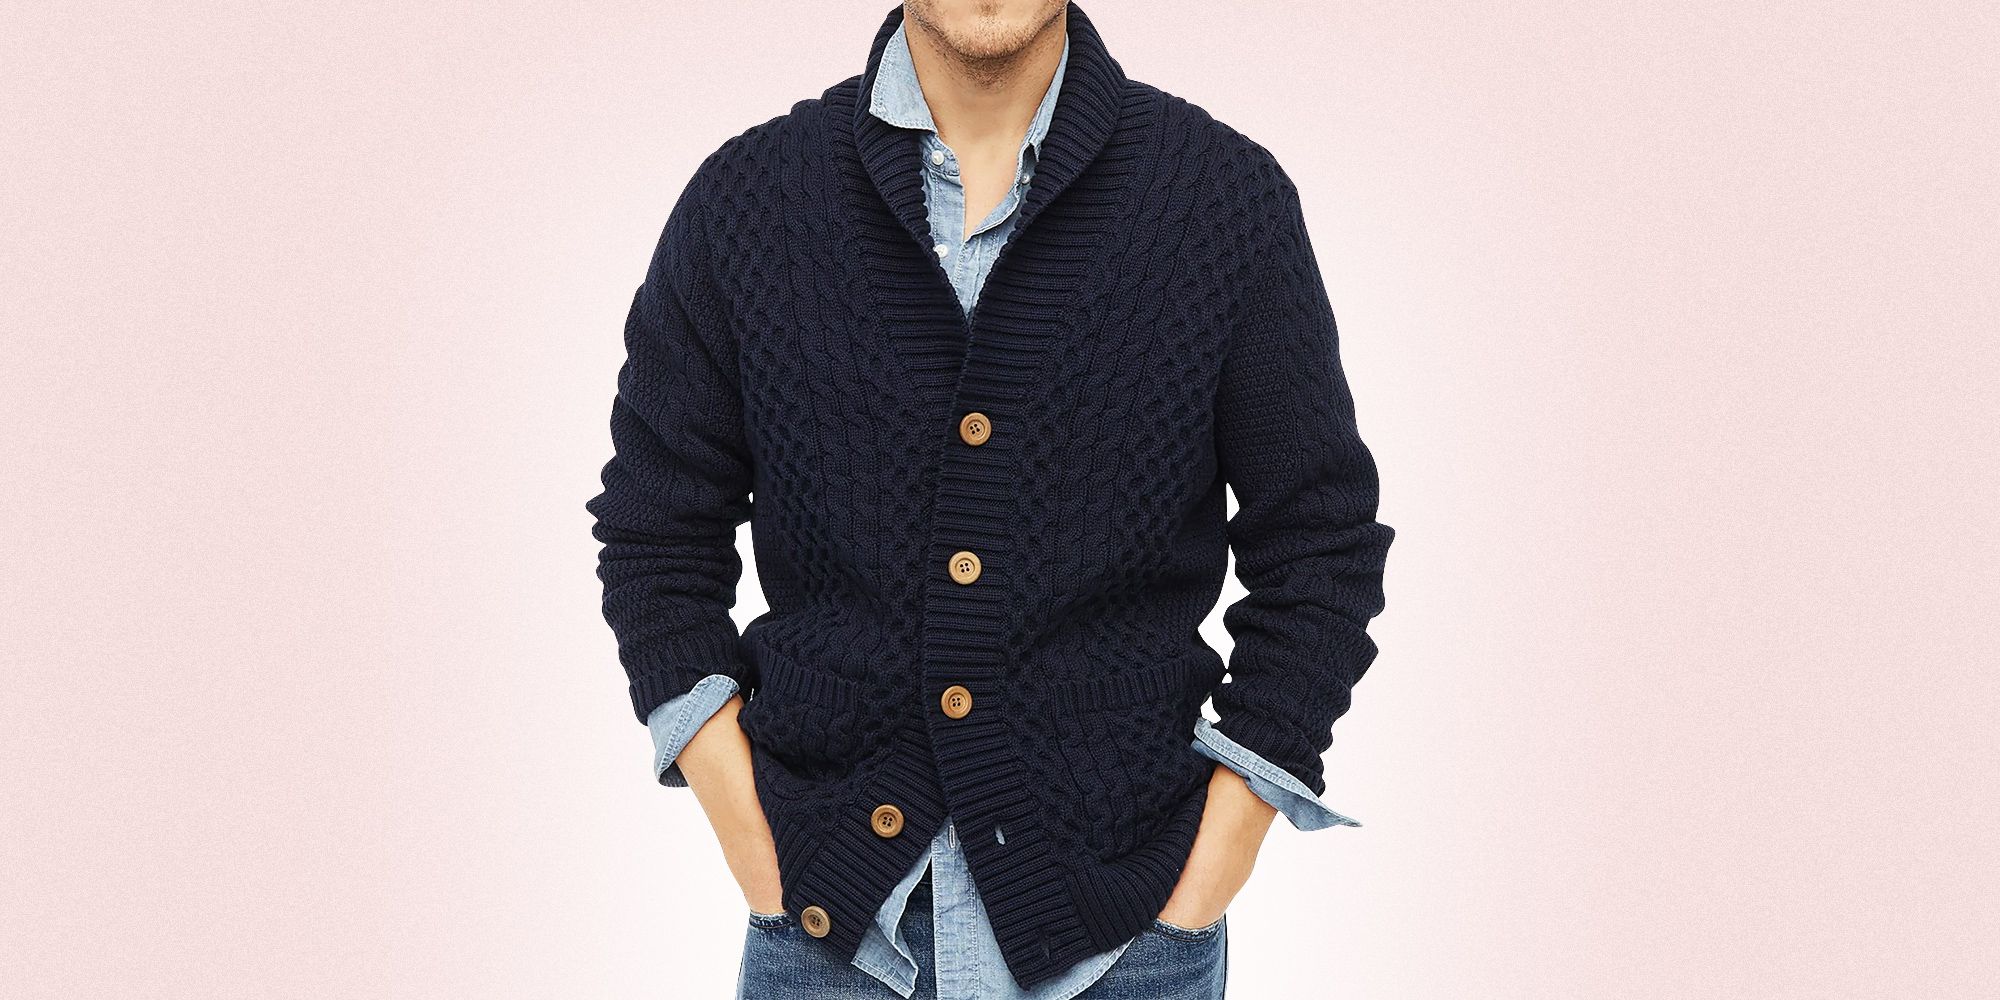 Hotmiss Mens Casual Shawl Collar Cable Knitted Button Down Cardigan Sweater